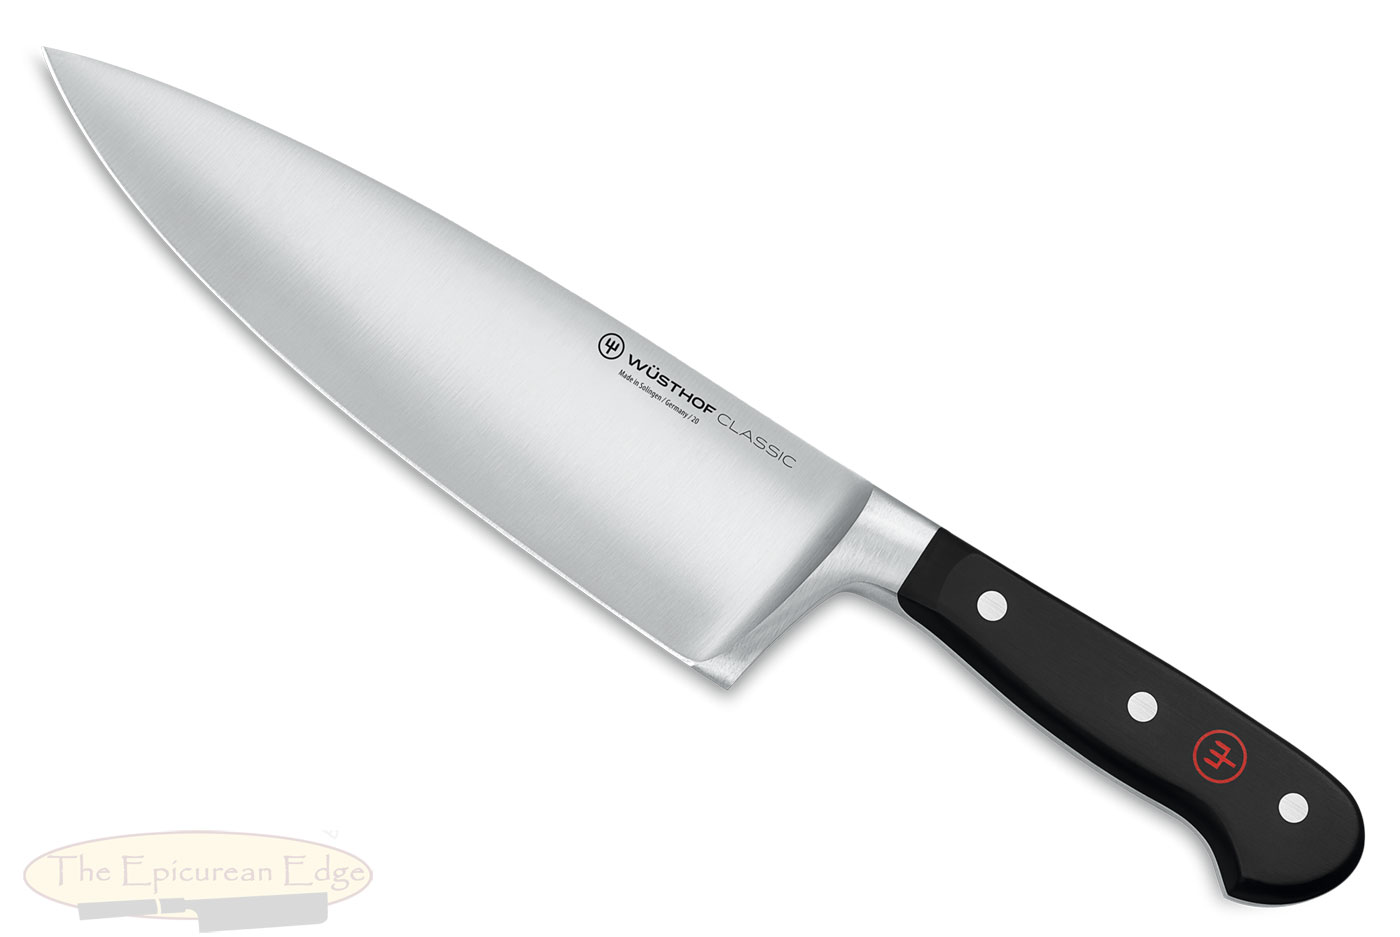 Wusthof-Trident Classic Chef's Knife - 8 in. Wide (1040104120)